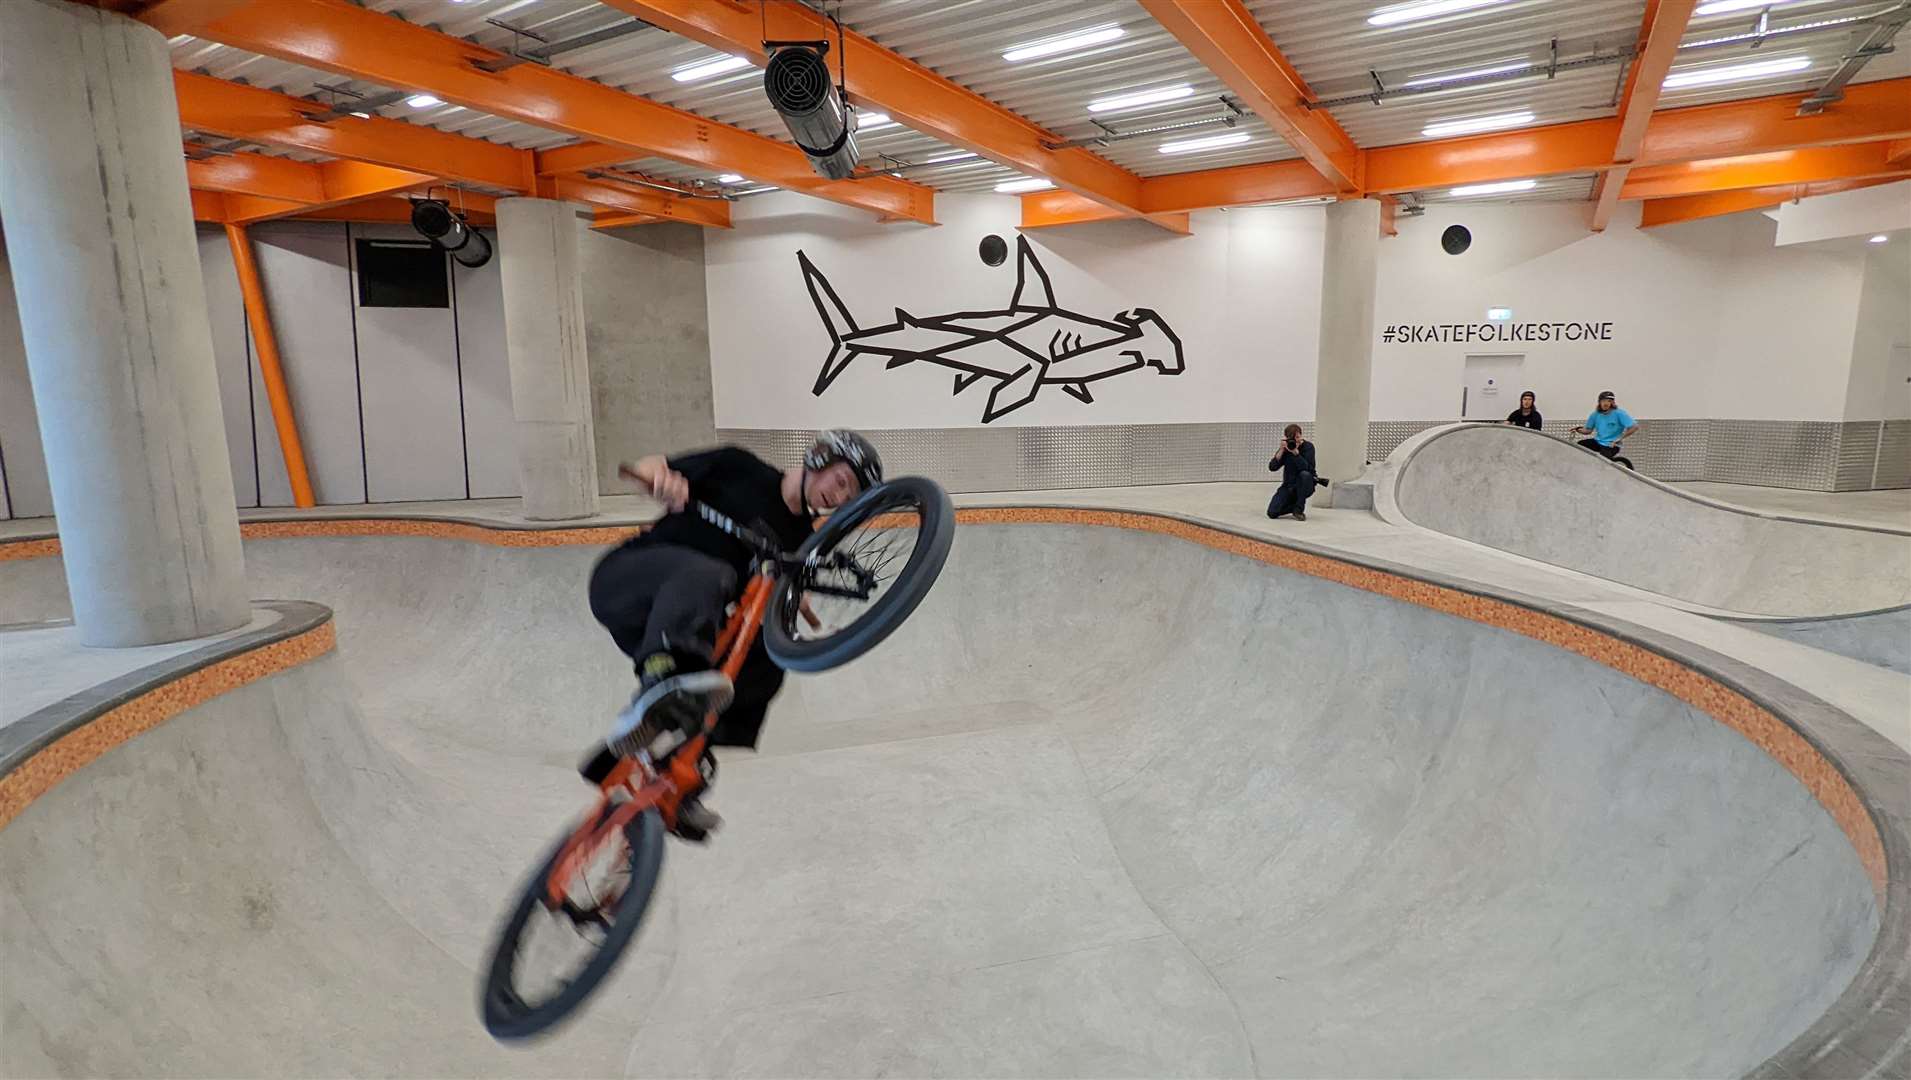 Riders show off their skills at today's preview of the new F51 skate park